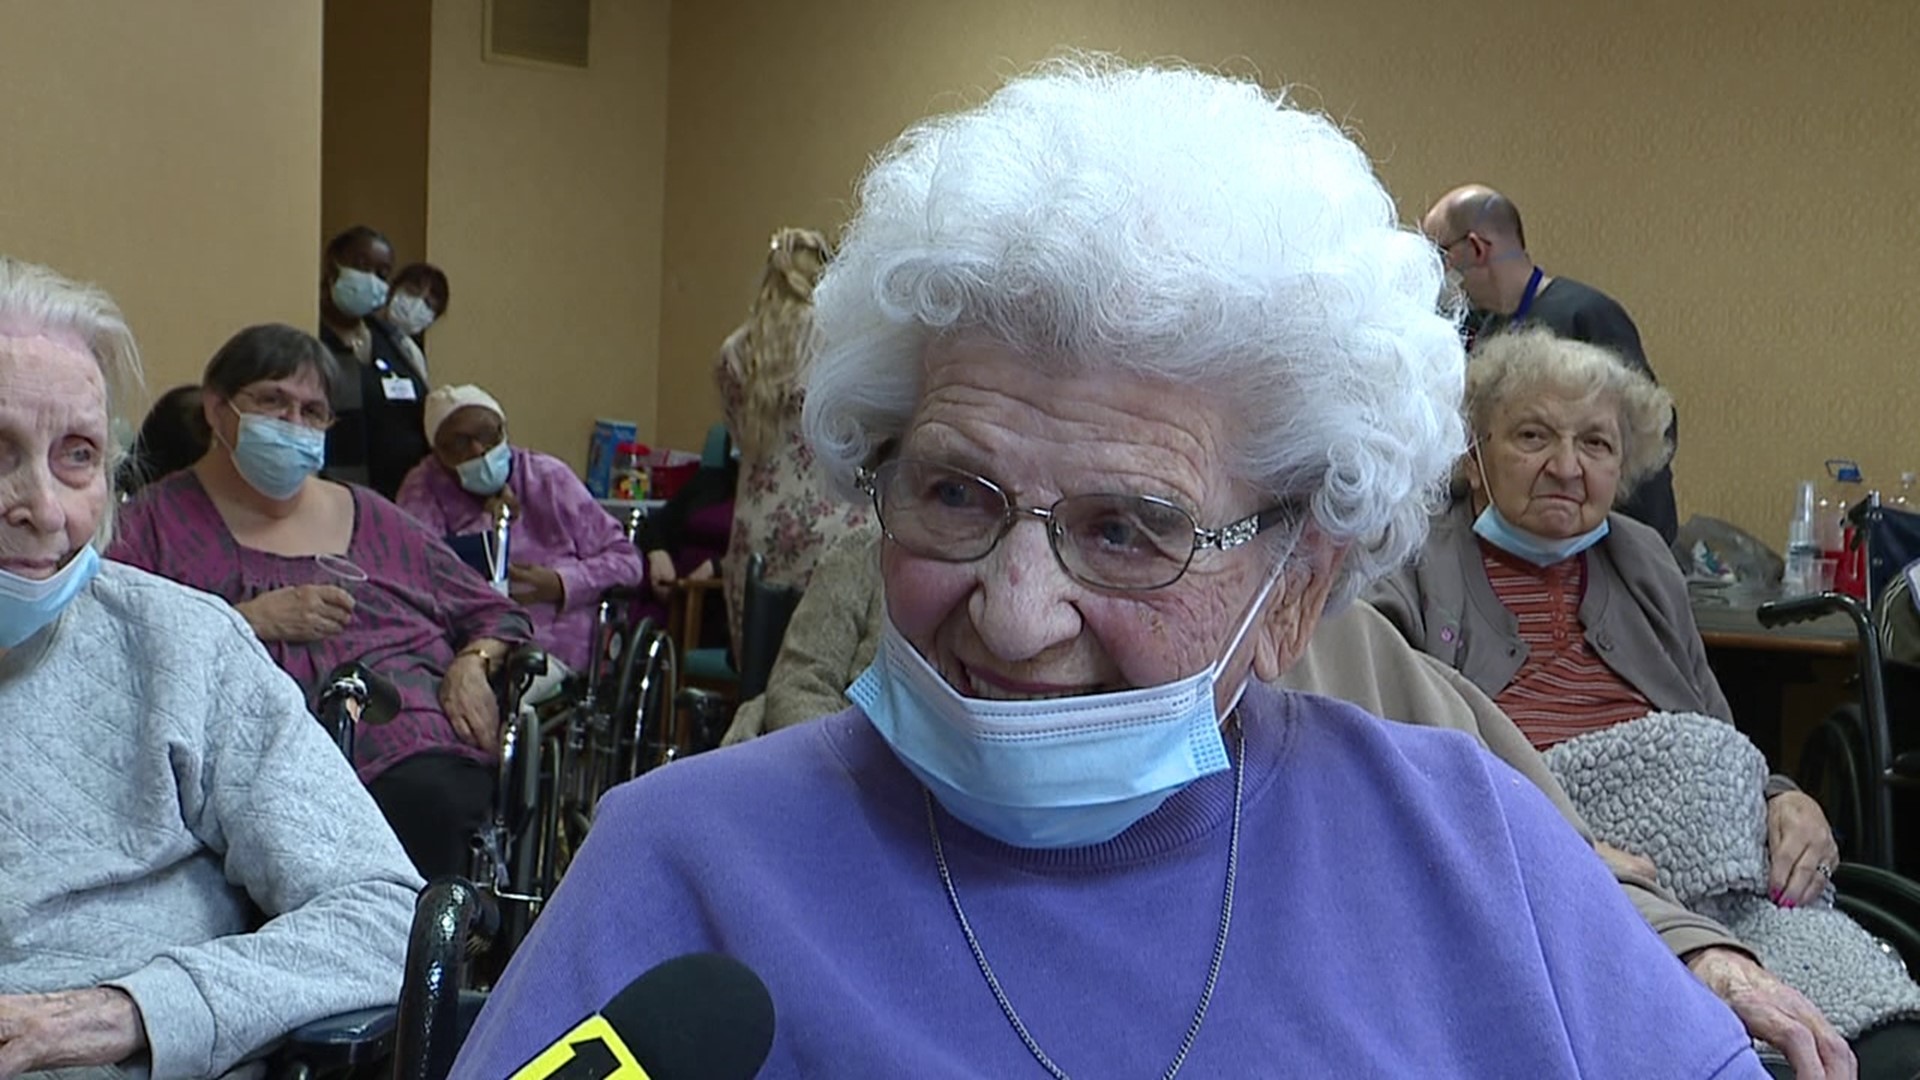 It was a special celebration on Tuesday as folks in Hazleton gathered to wish Helen Rushinski a Happy 107th Birthday.